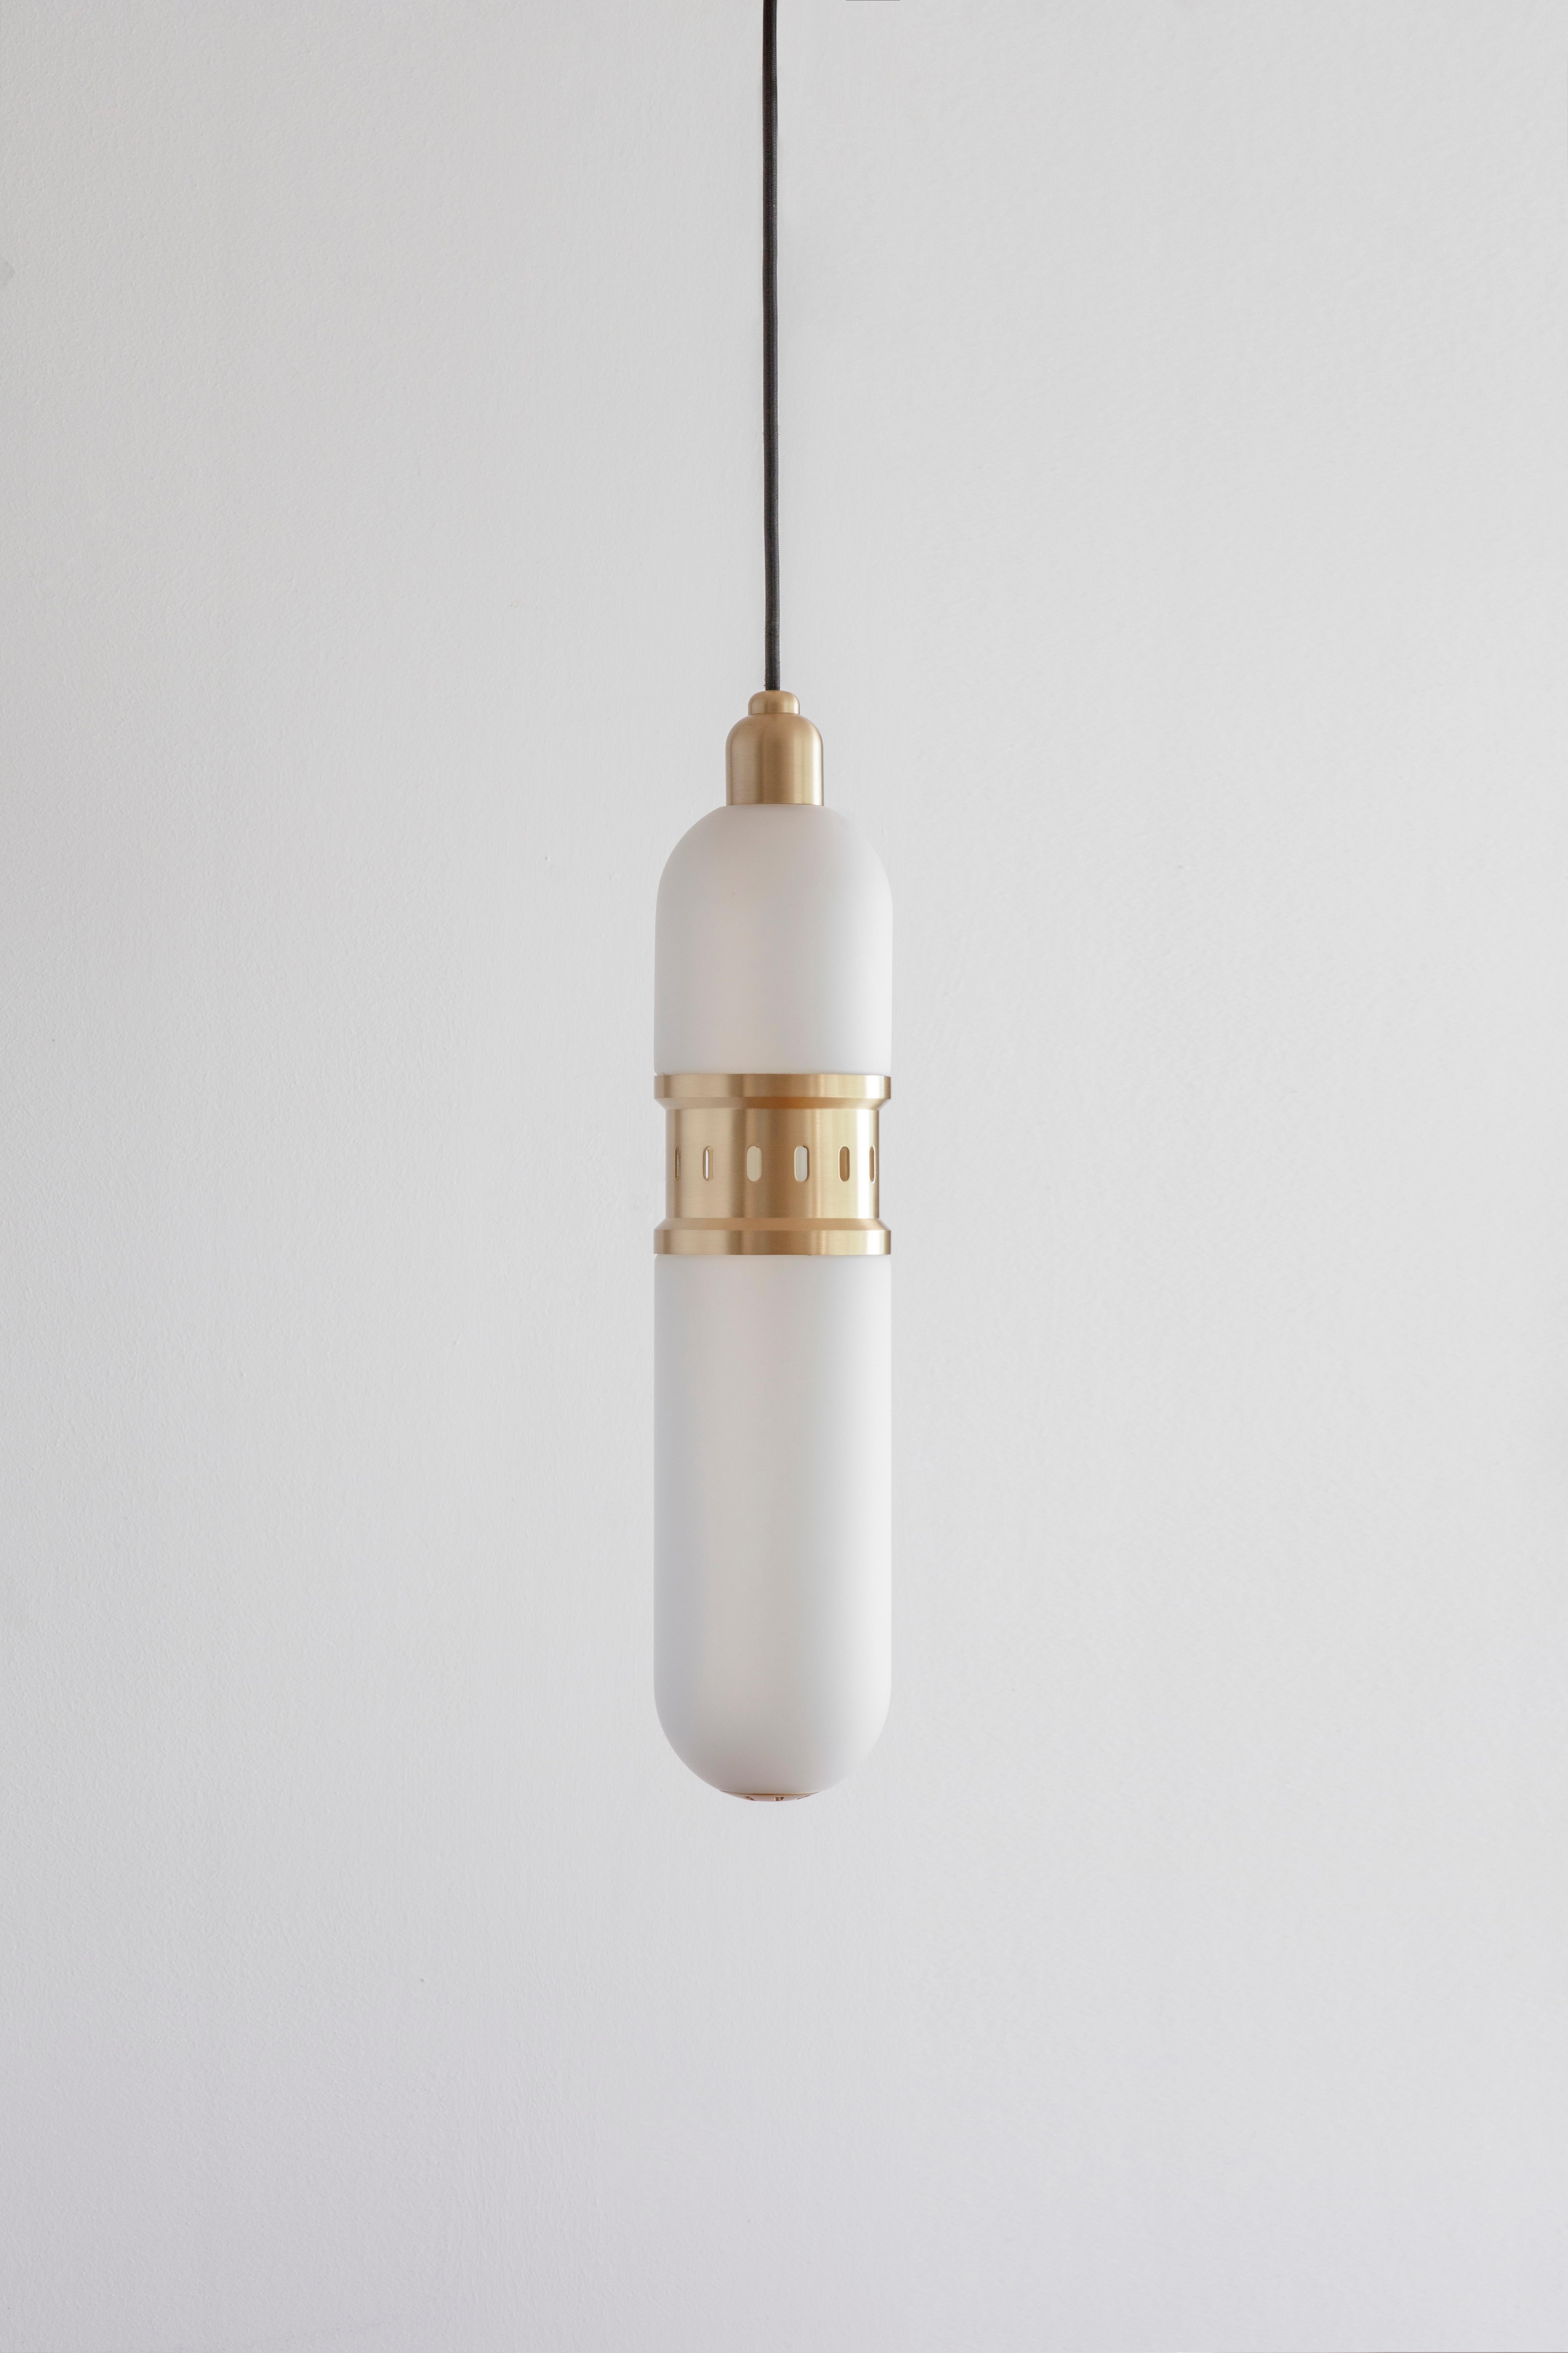 Occulo brass pendant lamp by Bert Frank
Dimensions: 35 x H 46 cm 
Materials: brass, glass
Available in brushed brass, dark bronze or satin nickel.

All our lamps can be wired according to each country. If sold to the USA it will be wired for